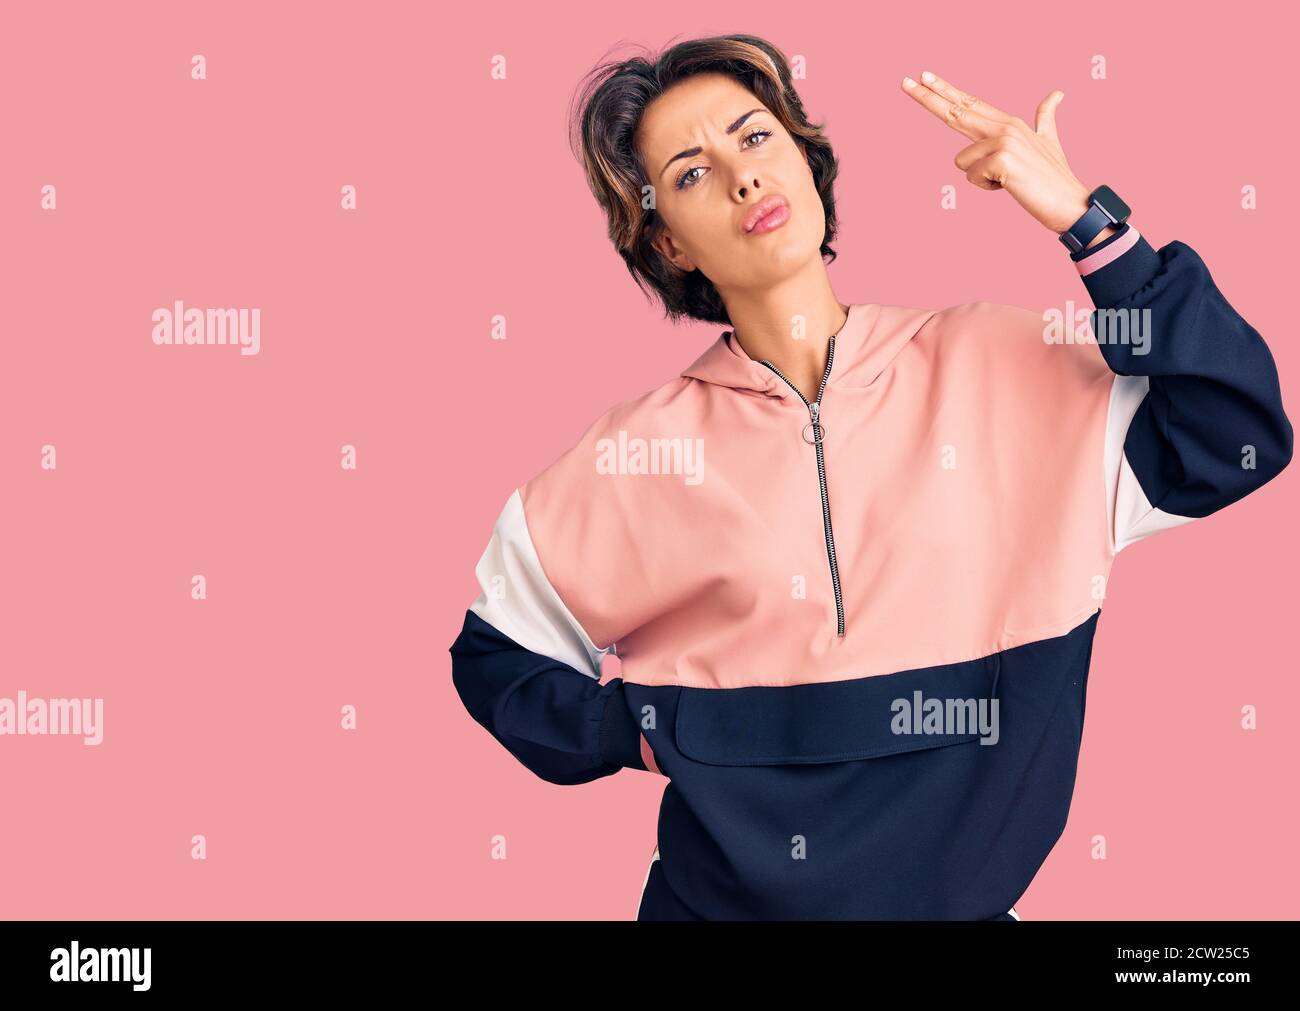 Young beautiful woman wearing sportswear shooting and killing oneself  pointing hand and fingers to head like gun, suicide gesture Stock Photo -  Alamy